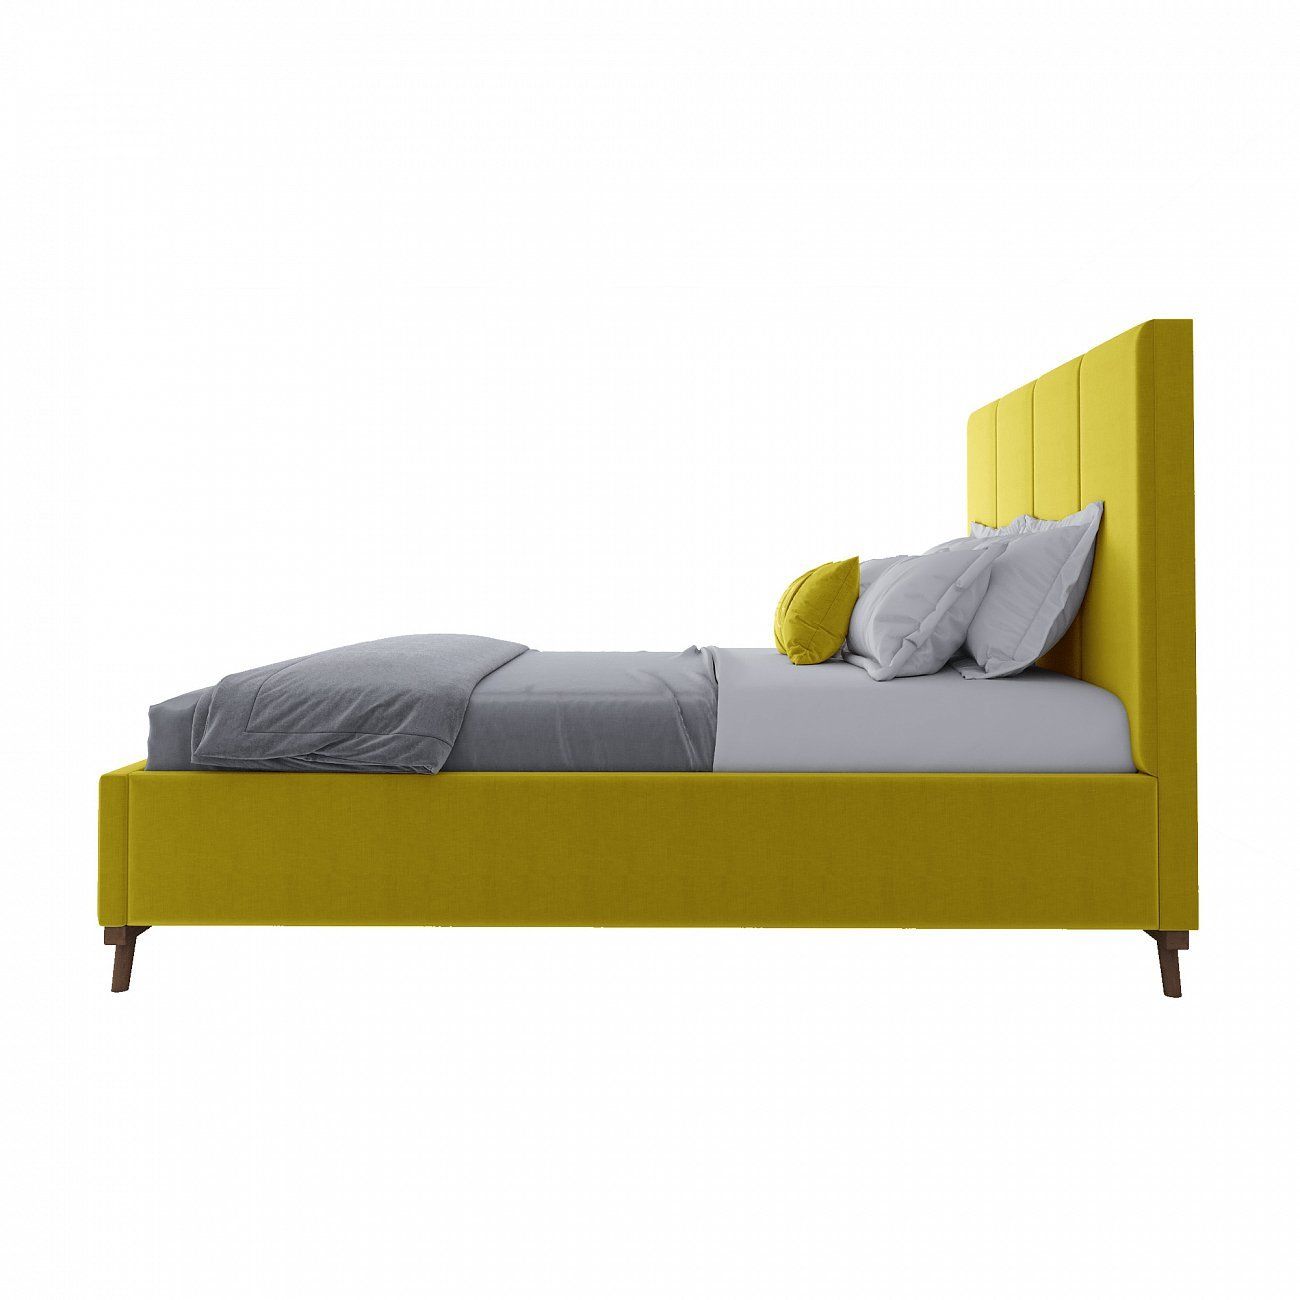 Double bed 160x200 cm yellow Carter Gold